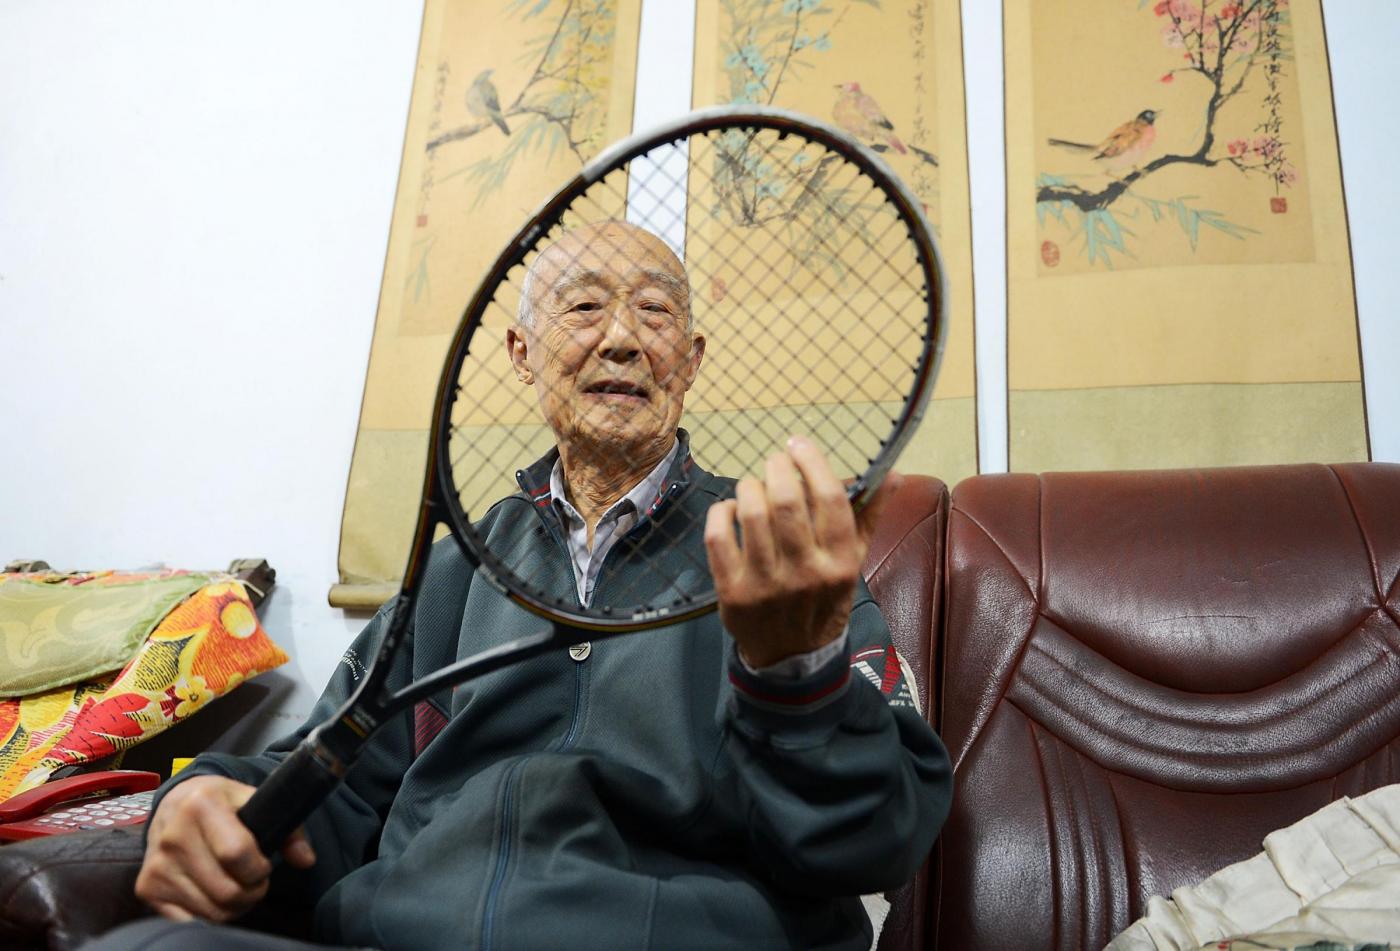 Huang Xingqiao, 99 anni,candidato a guinness world record 03